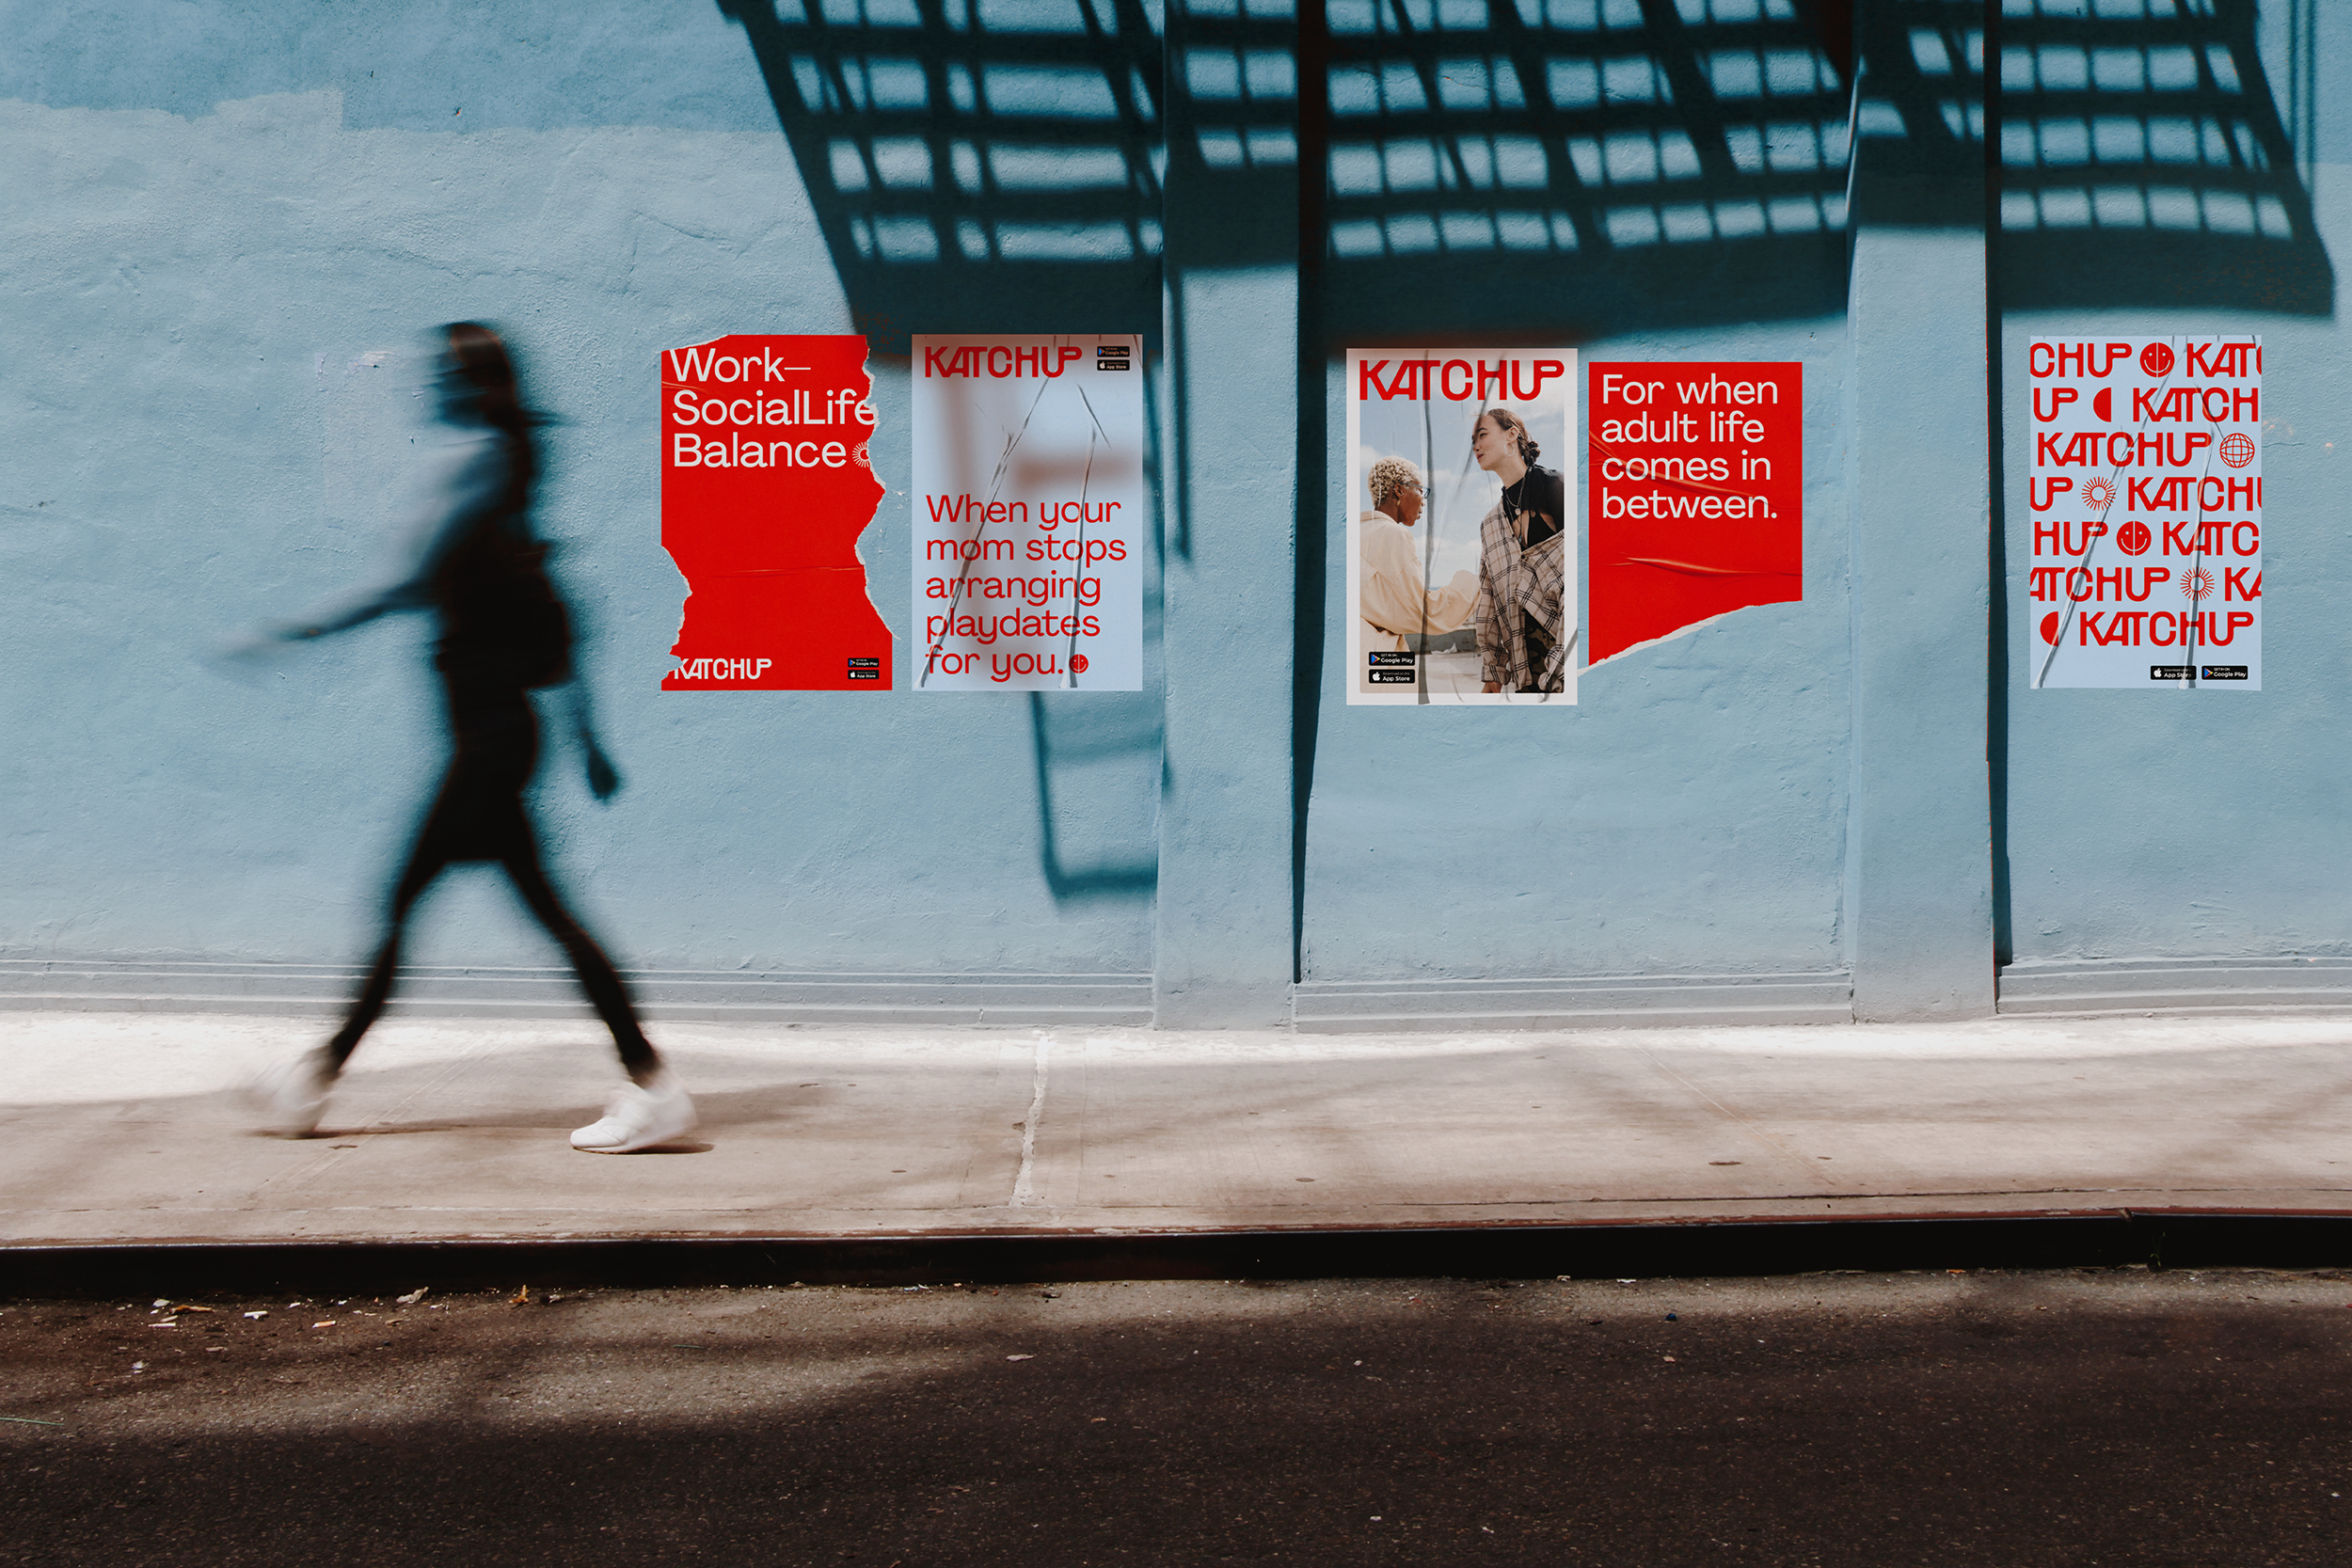 a person walking by wall posters showing the Katchup app promotion